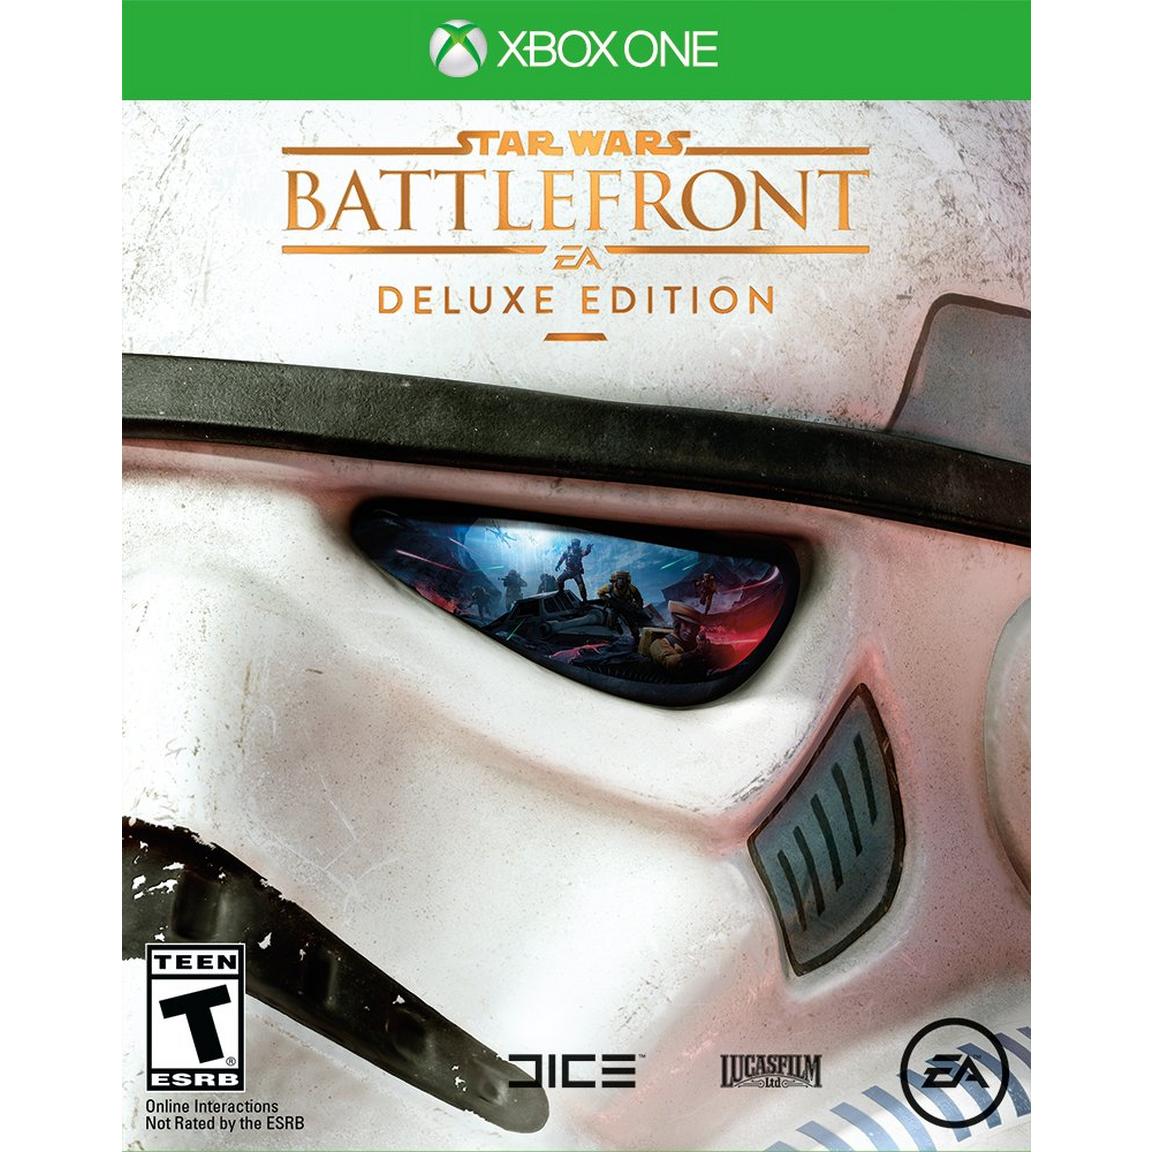 Star Wars Battlefront Deluxe Edition - Xbox One -  Electronic Arts, G3Q-00071